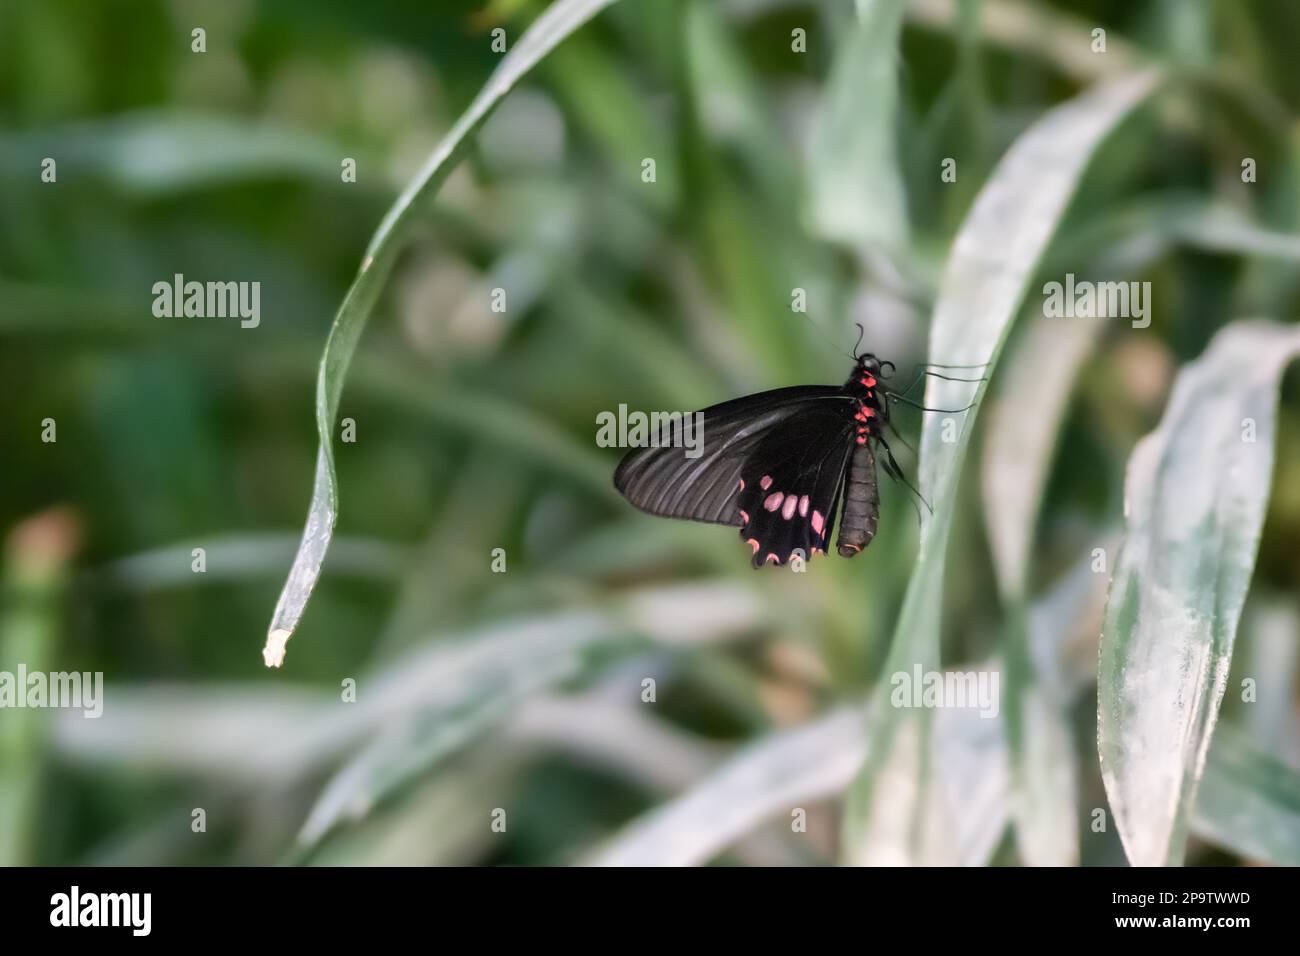 Emerald-patched cattleheart (Parides sesostris) on an orchid leaf. Stock Photo